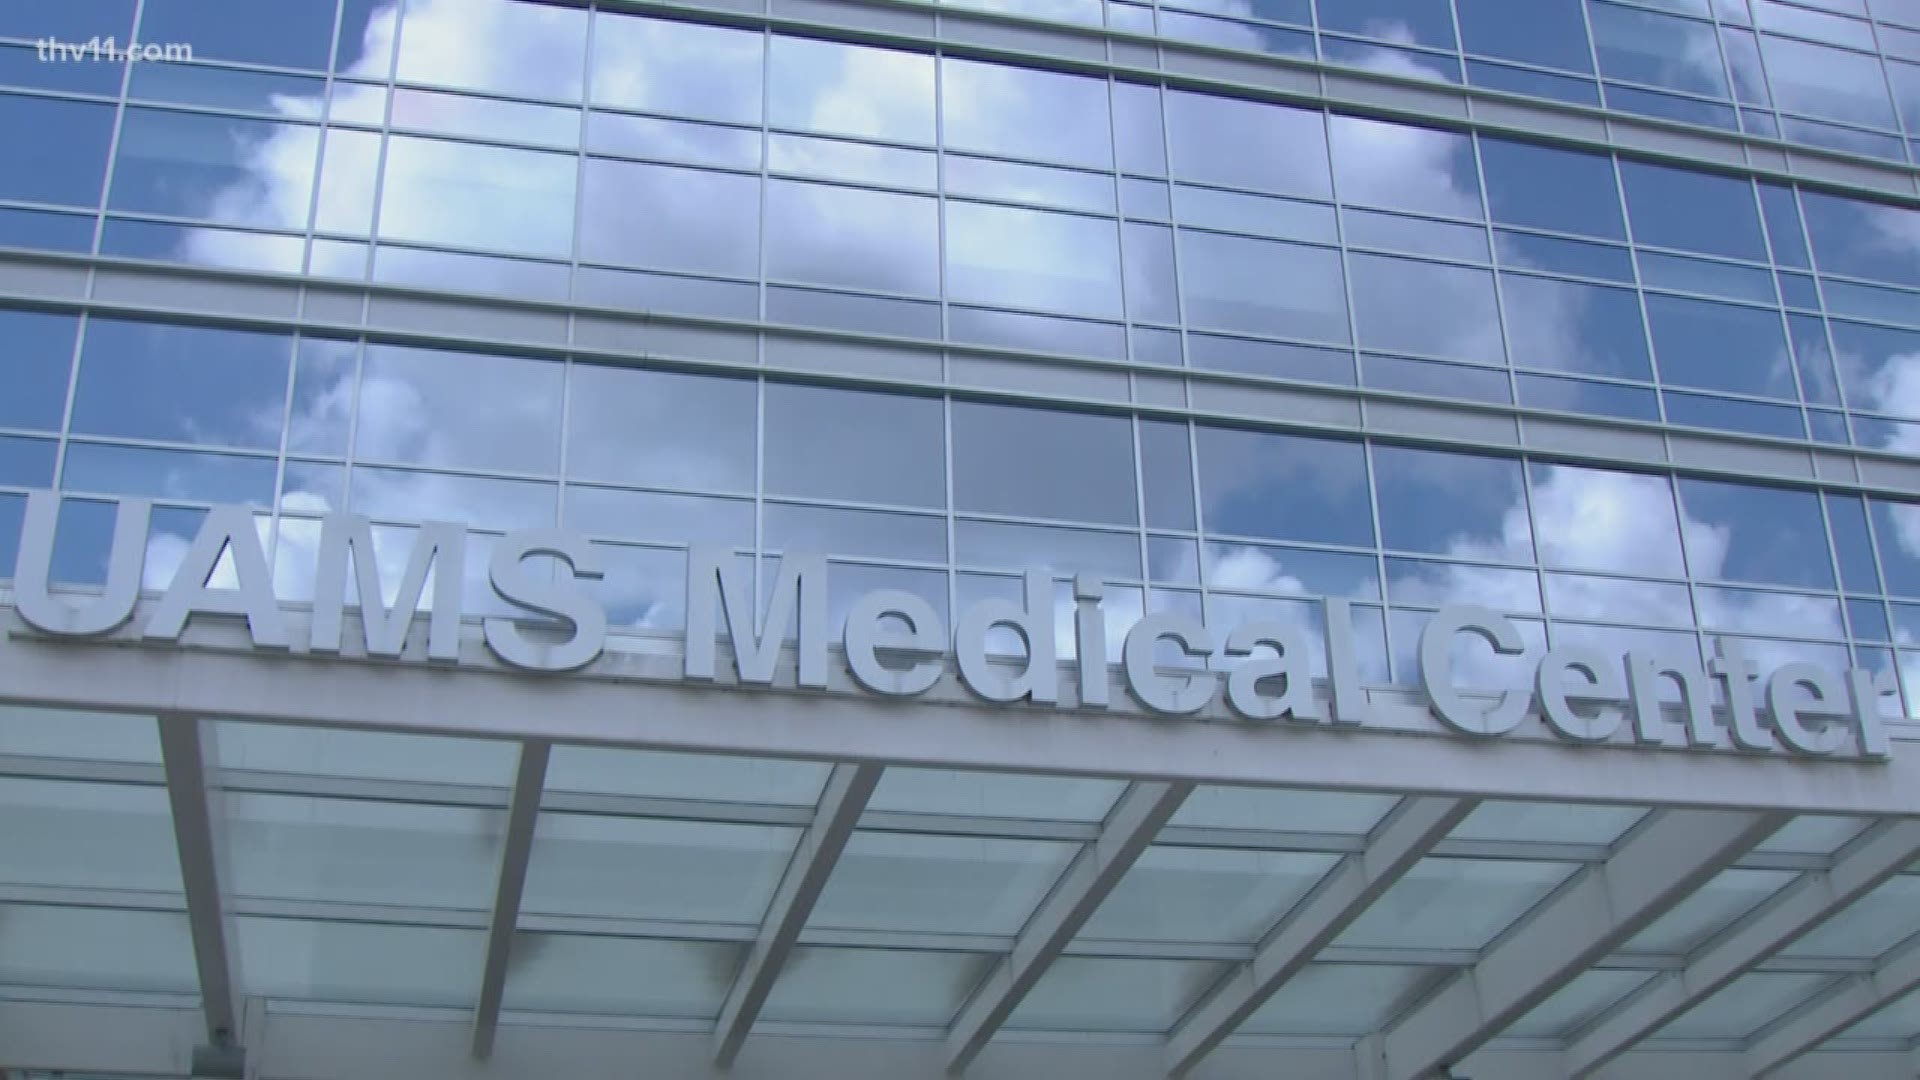 UAMS has announced it will get more than $24 million in federal funding over the next five years.